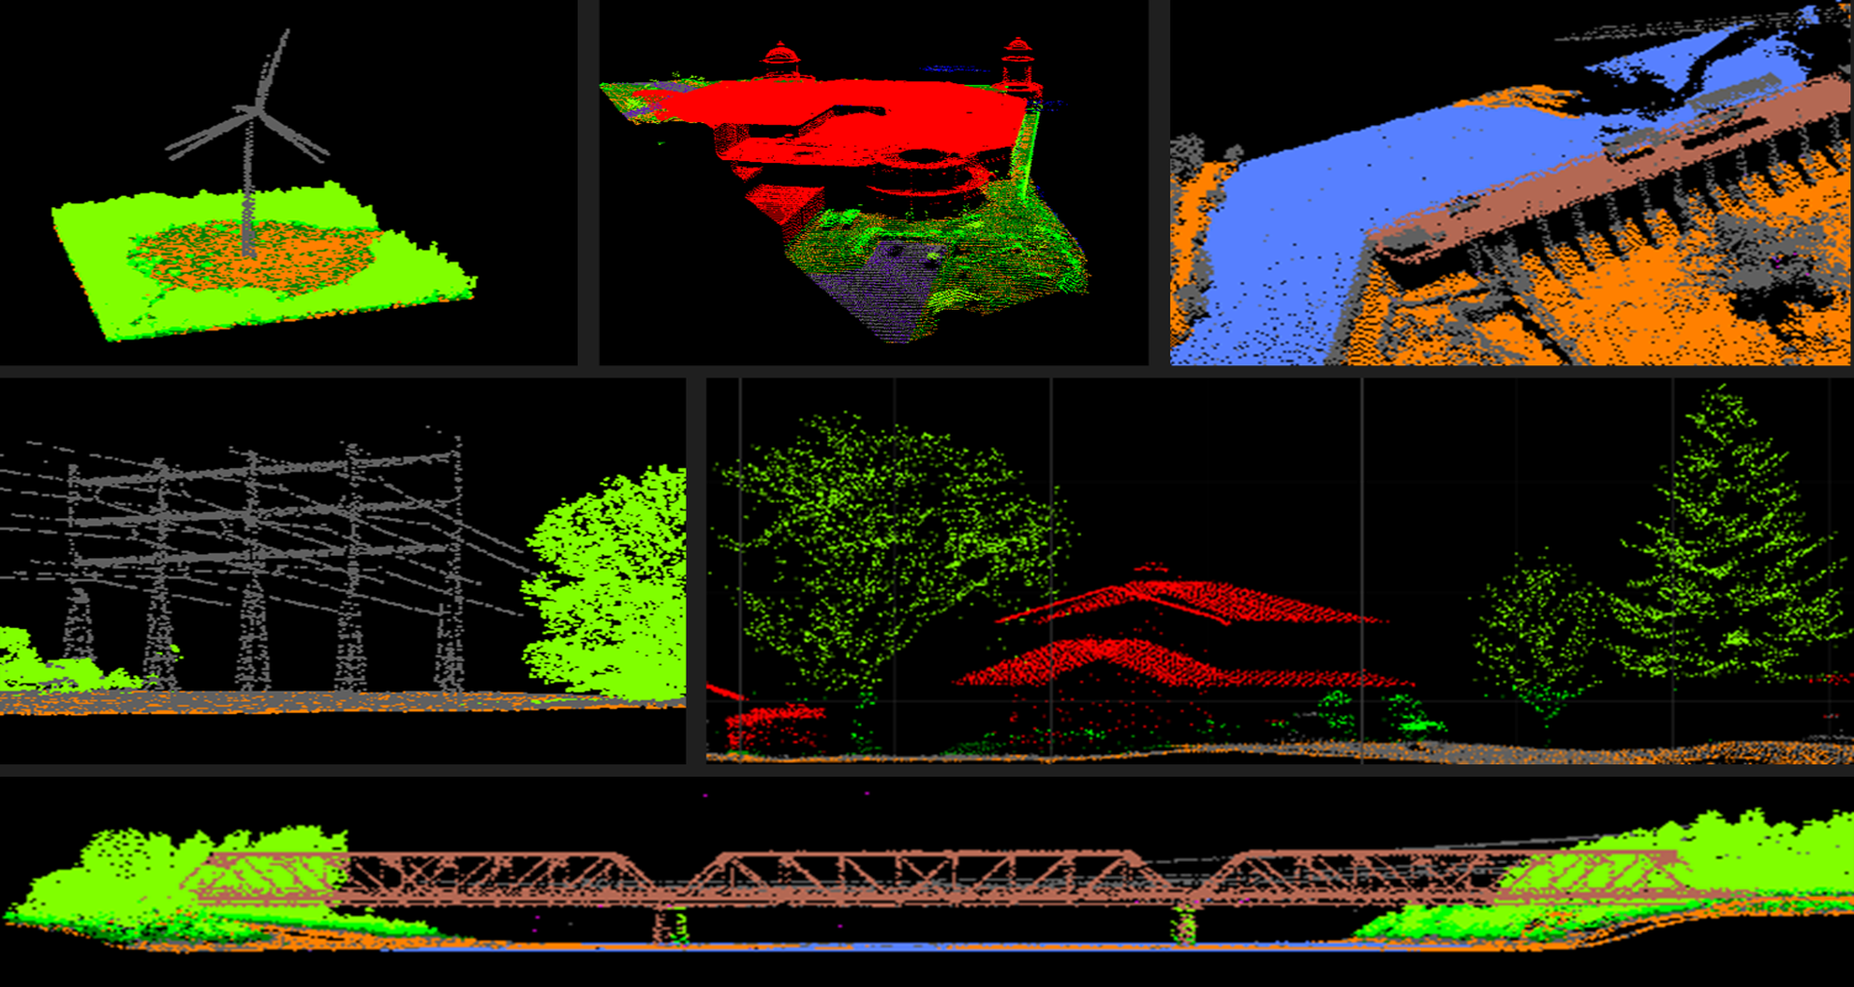 3D visuals of point clouds depicting various features: buildings, wind turbine, a dam, hydro lines, trees,and a bridge.